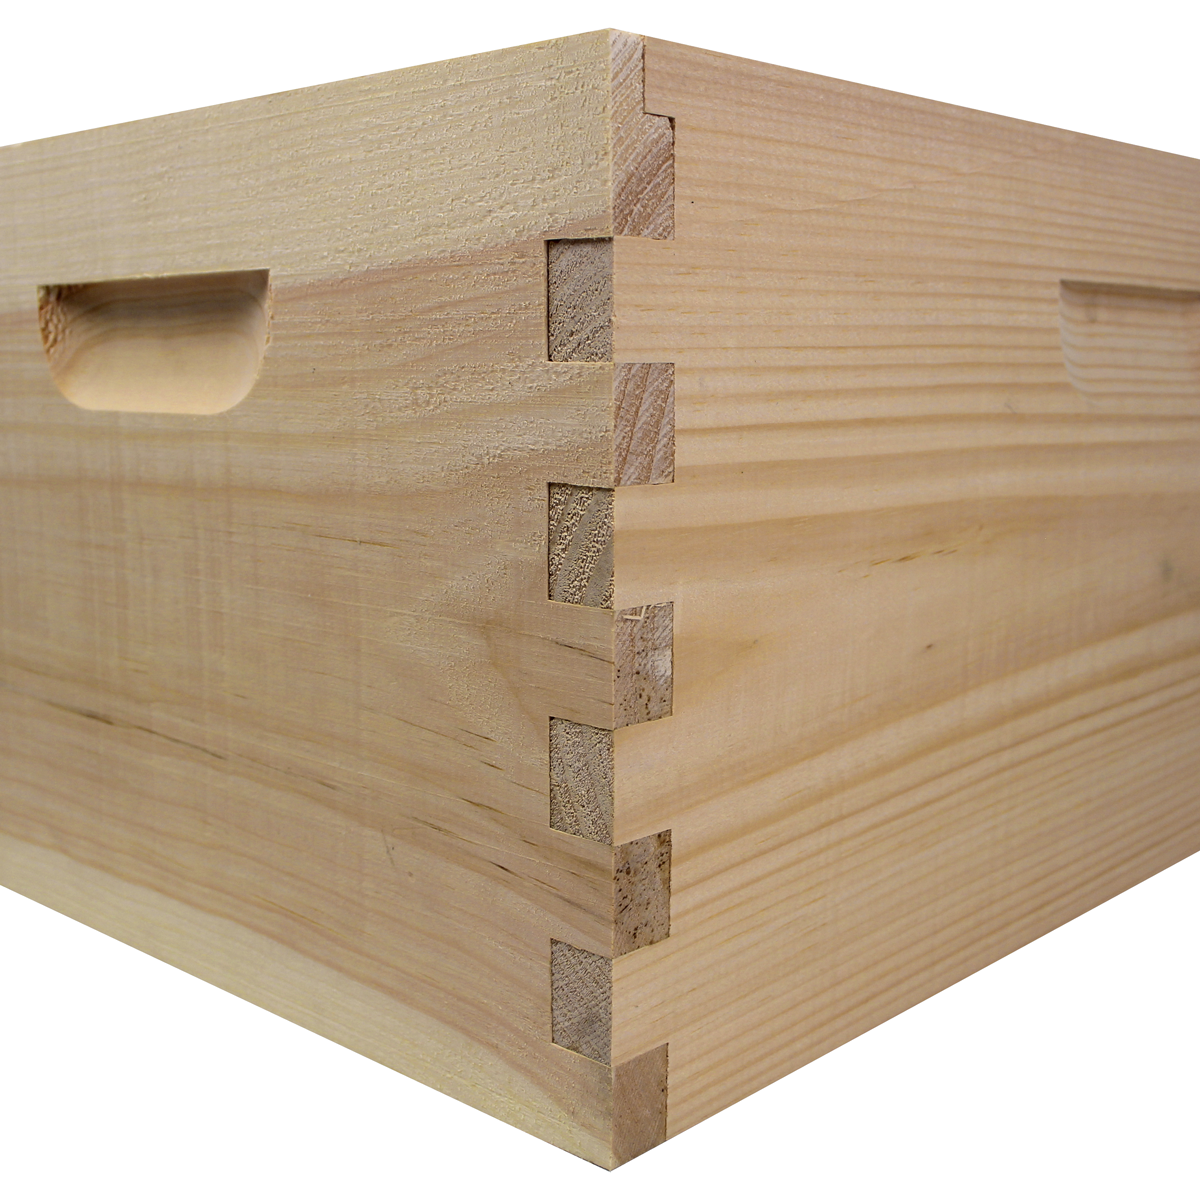 framing - What woods are soft enough for glazier points? - Woodworking  Stack Exchange